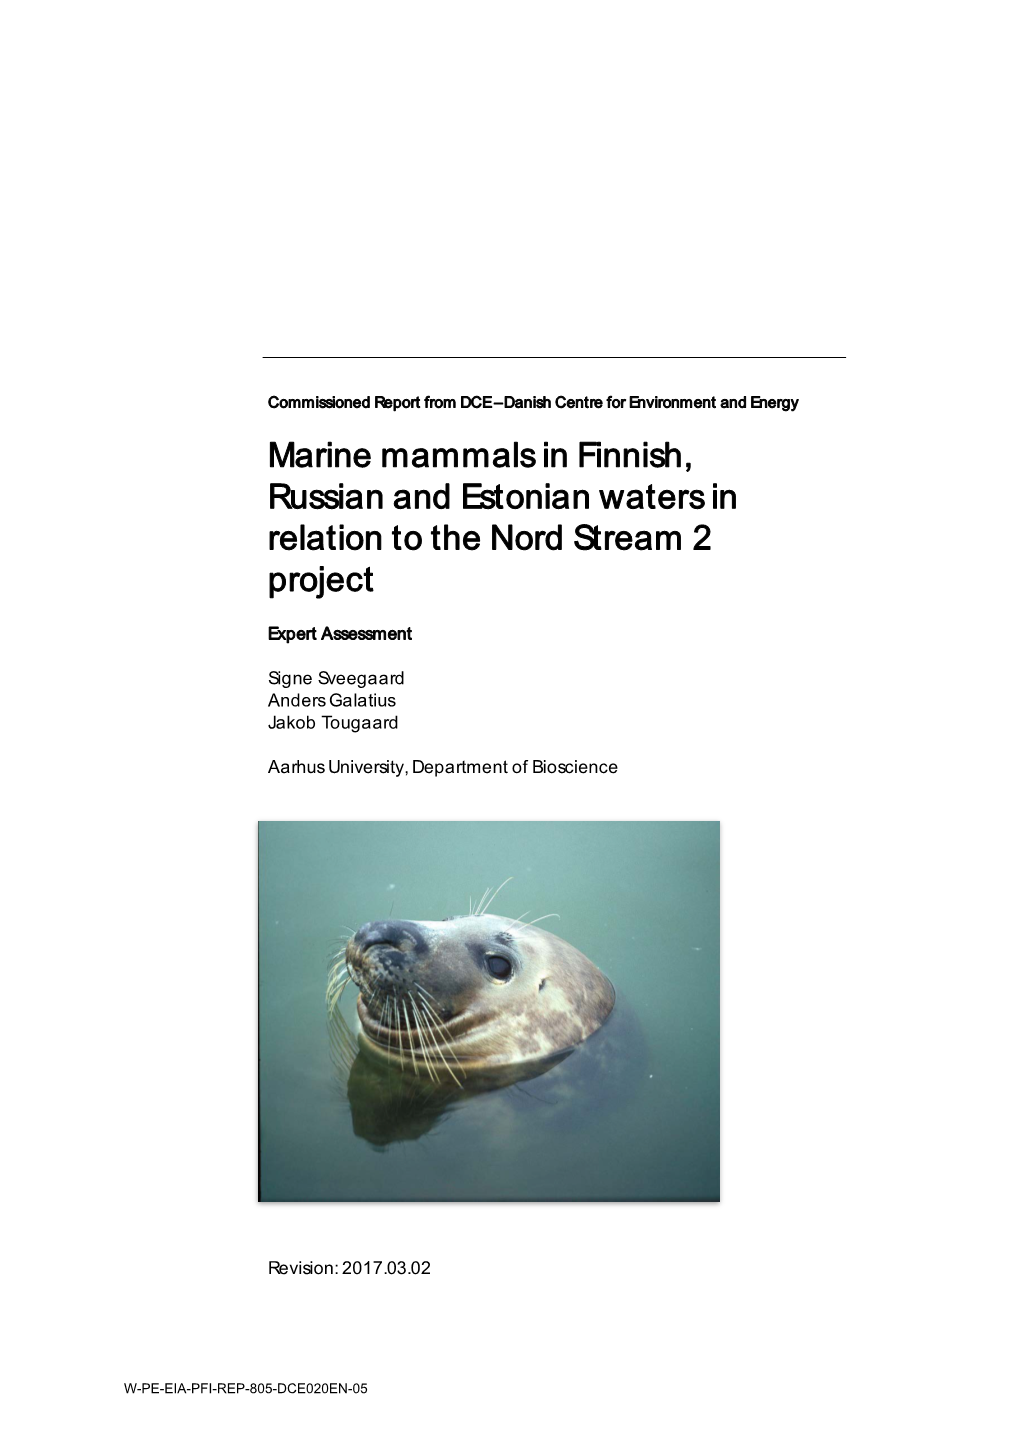 Marine Mammals in Finnish, Russian and Estonian Waters in Relation to the Nord Stream 2 Project